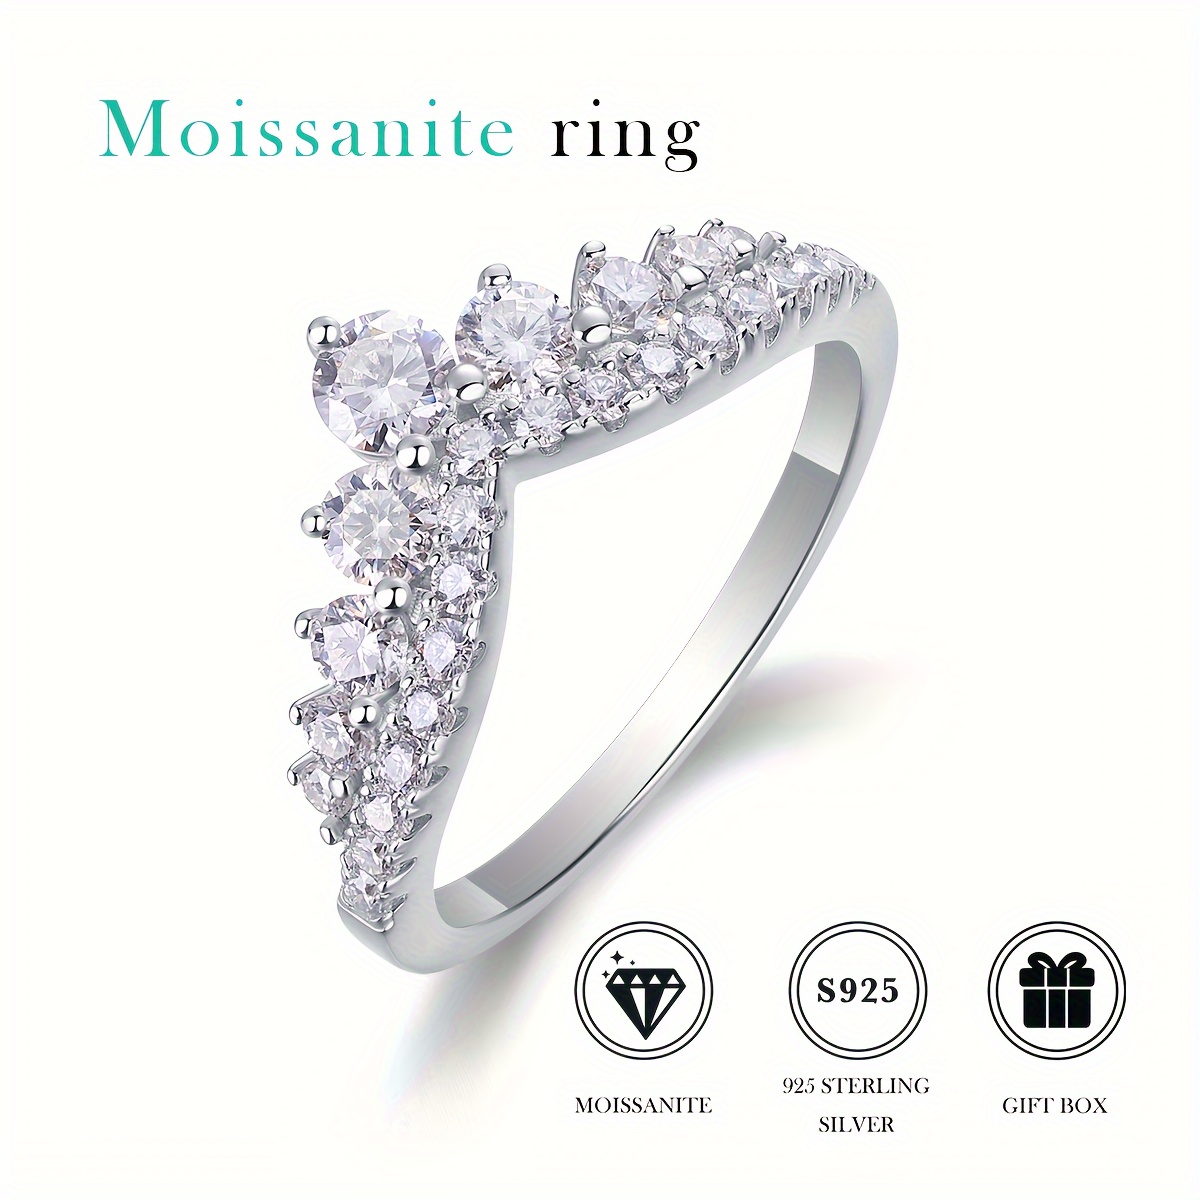 

1pc Dazzling Hypoallergenic Moissanite Ring, 925 Sterling Silver-perfect For Engagement, Wedding Anniversaries & All Occasions